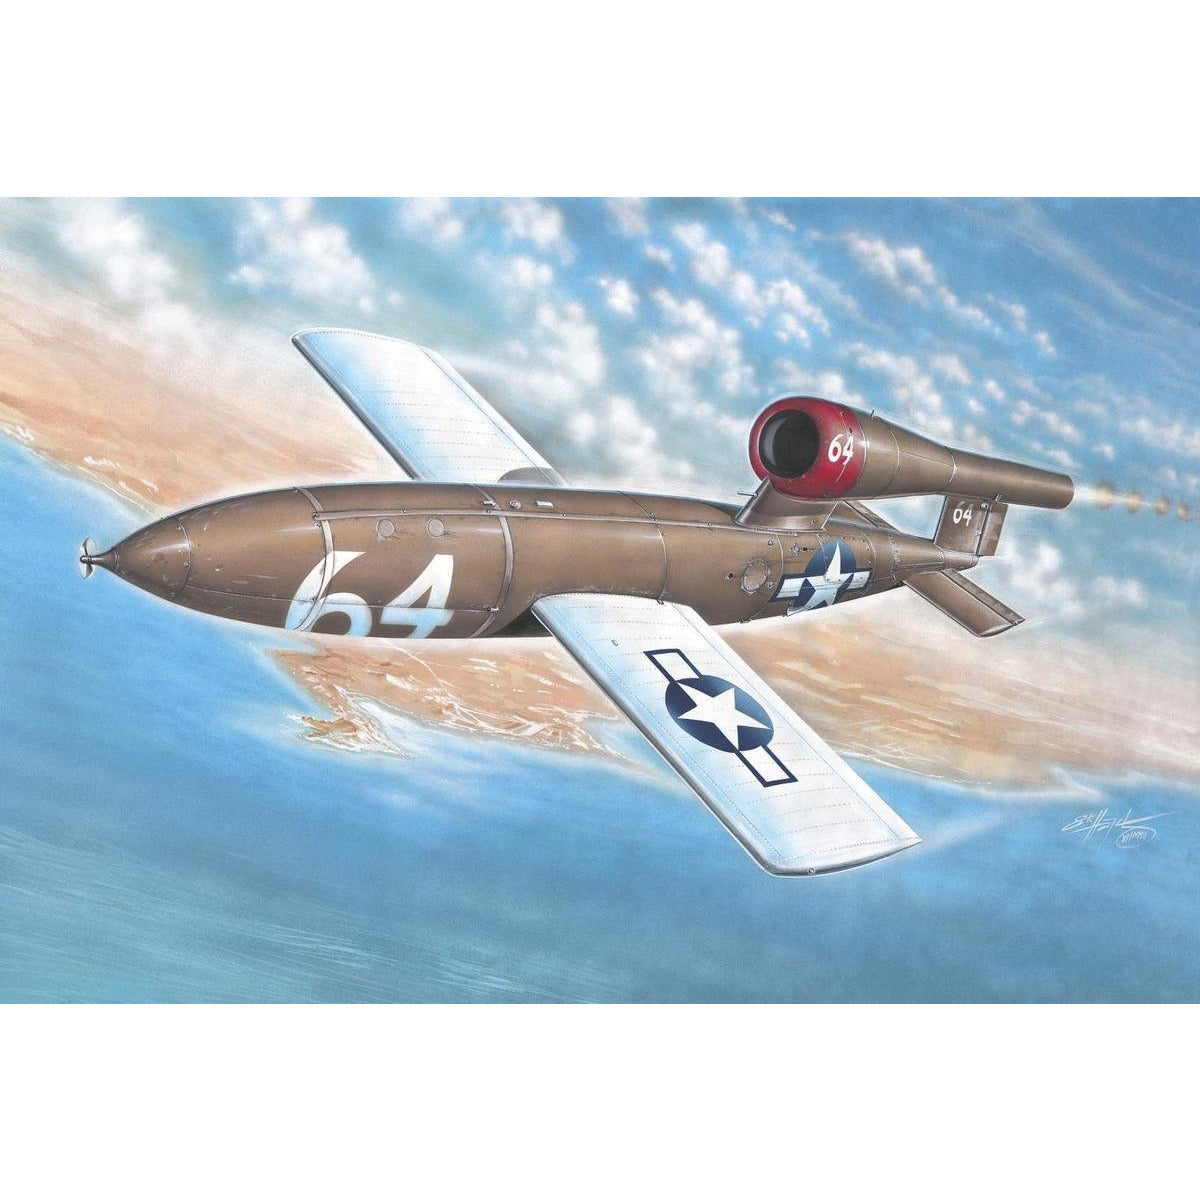 JB-2 Loon US version V-1 1/48 #48054 by Special Hobby